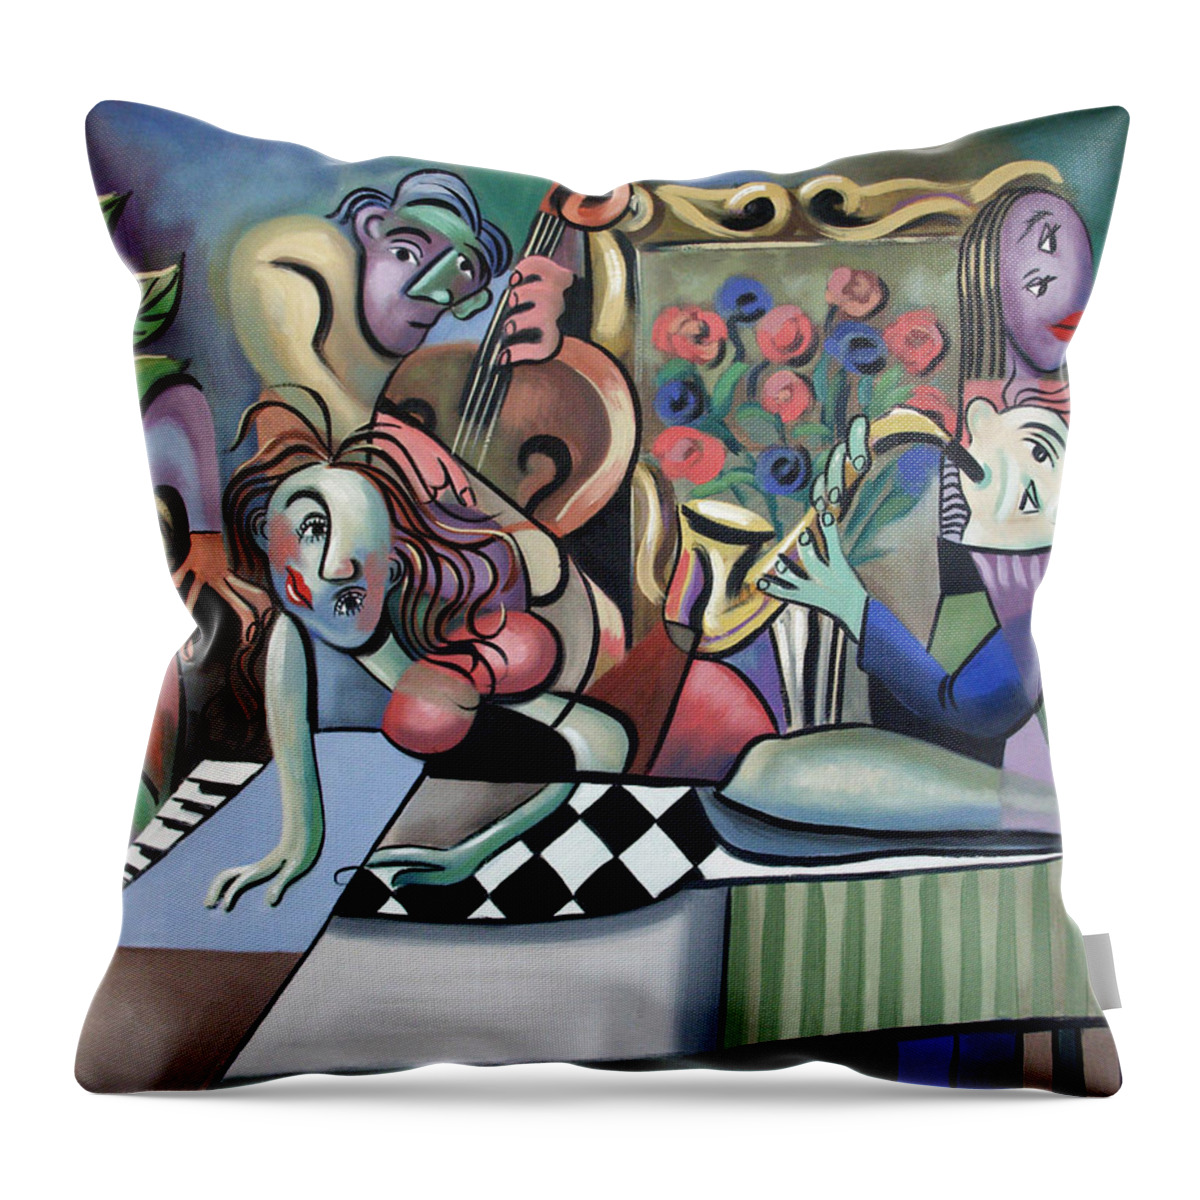 Fridays At Bernies Framed Prints Throw Pillow featuring the painting Play It Again Sam by Anthony Falbo